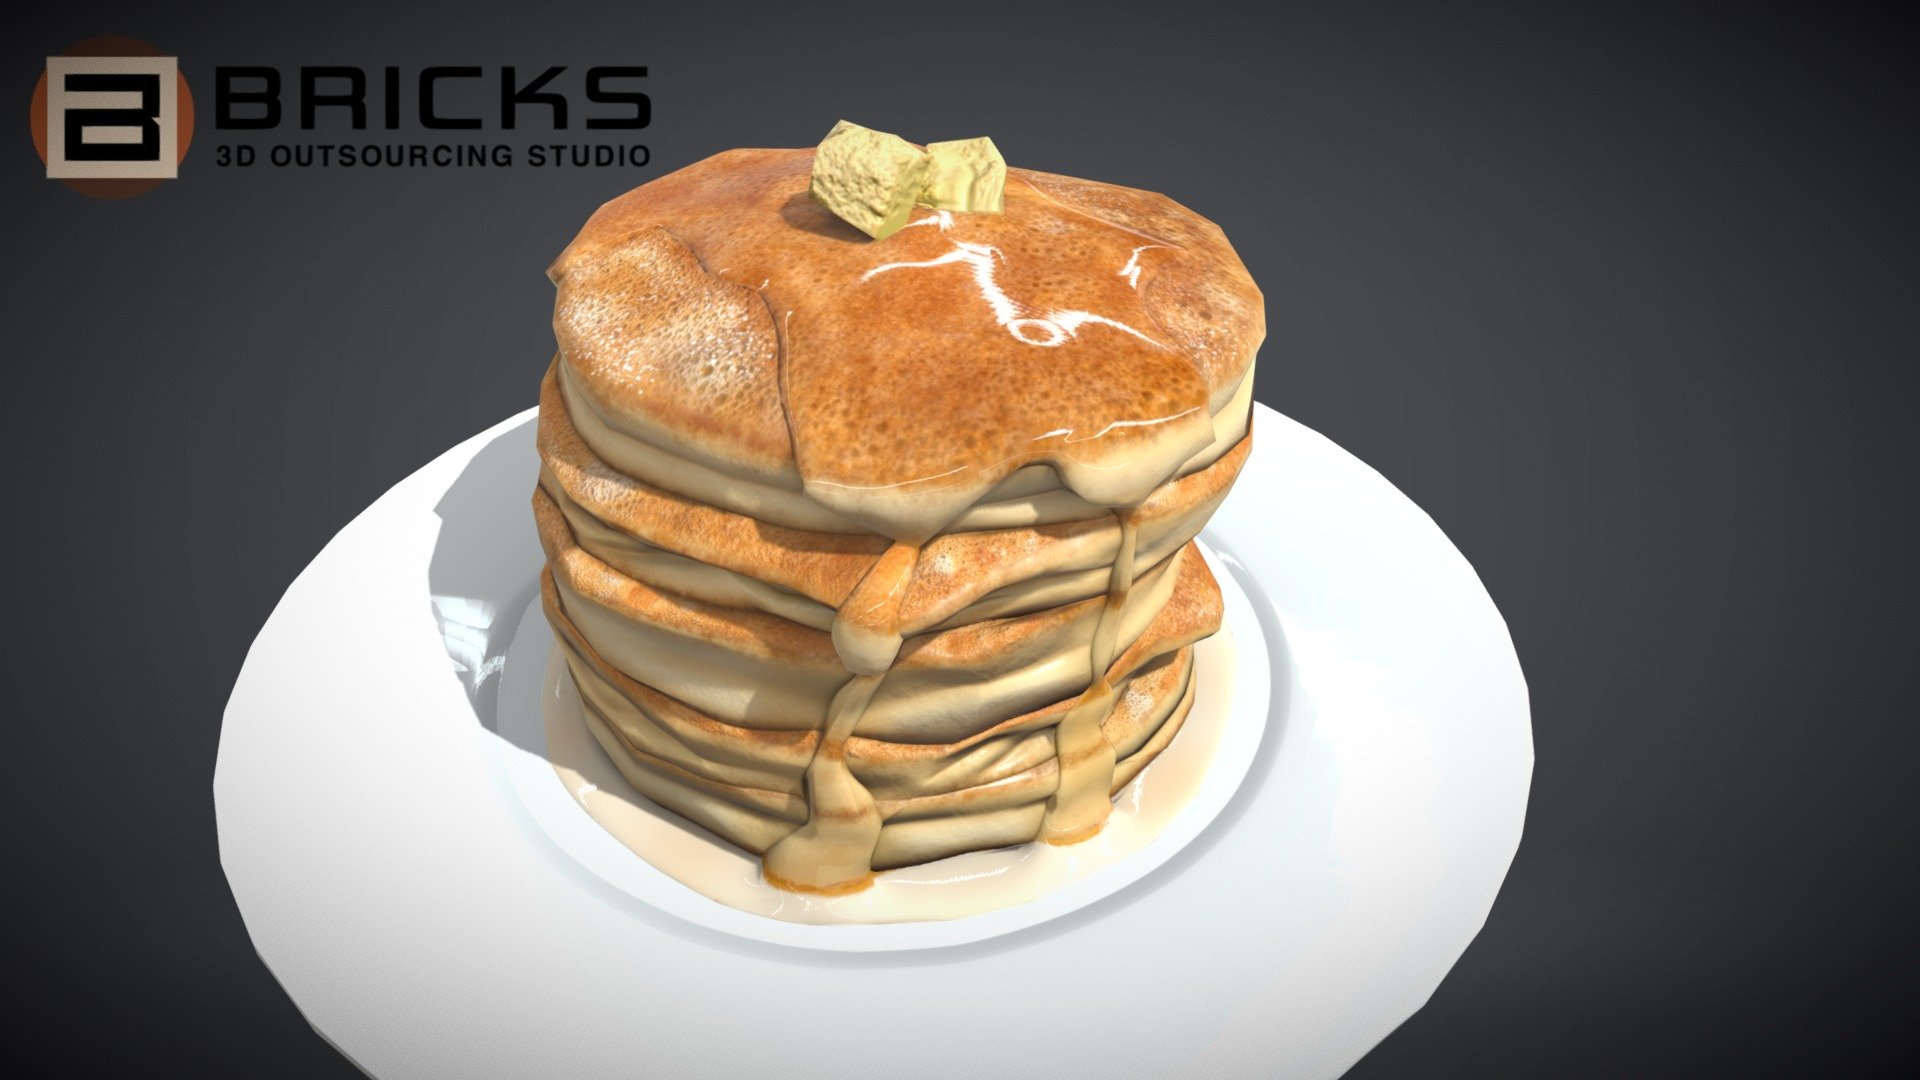 PBR Food Asset:
Pancake
Polycount: 2234
Vertex count: 1119
Texture Size: 2048px x 2048px
Normal: OpenGL

If you need any adjust in file please contact us: team@bricks3dstudio.com

Hire us: tringuyen@bricks3dstudio.com
Here is us: https://www.bricks3dstudio.com/
        https://www.artstation.com/bricksstudio
        https://www.facebook.com/Bricks3dstudio/
        https://www.linkedin.com/in/bricks-studio-b10462252/ - Pancake - Buy Royalty Free 3D model by Bricks Studio (@bricks3dstudio) 3d model